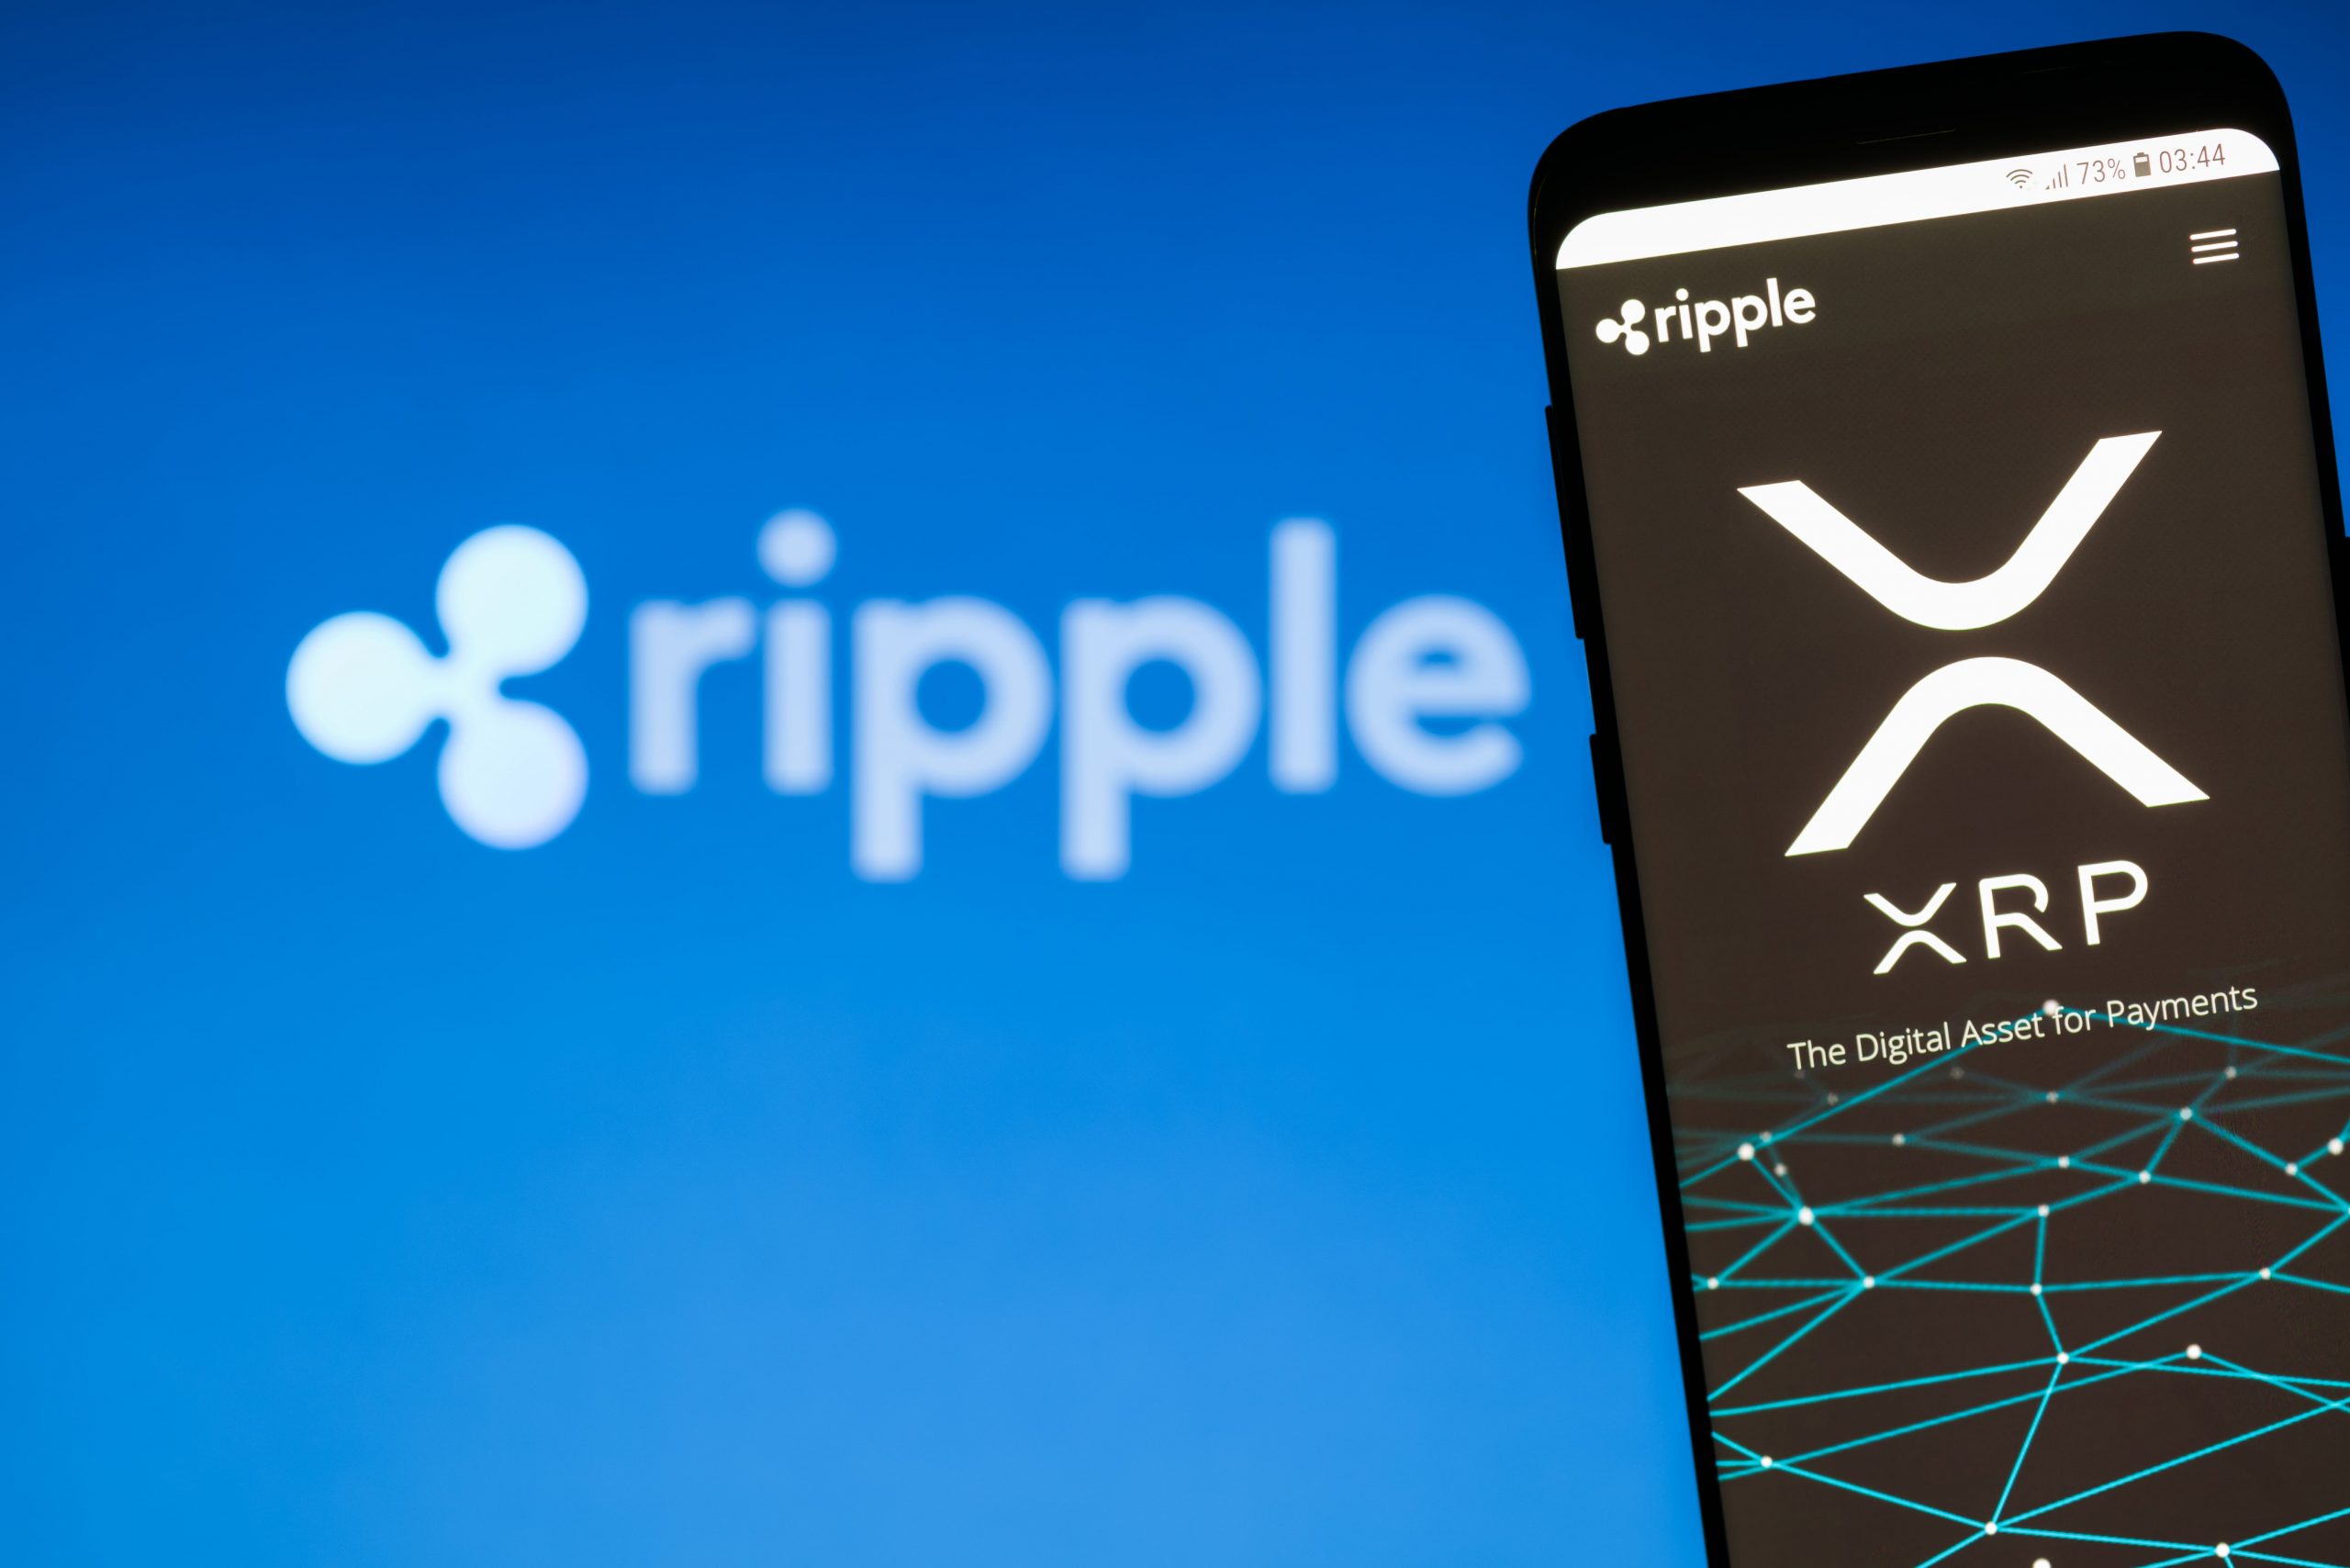 Ripple ODL Marking Notable Achievements: SBI Holdings CEO